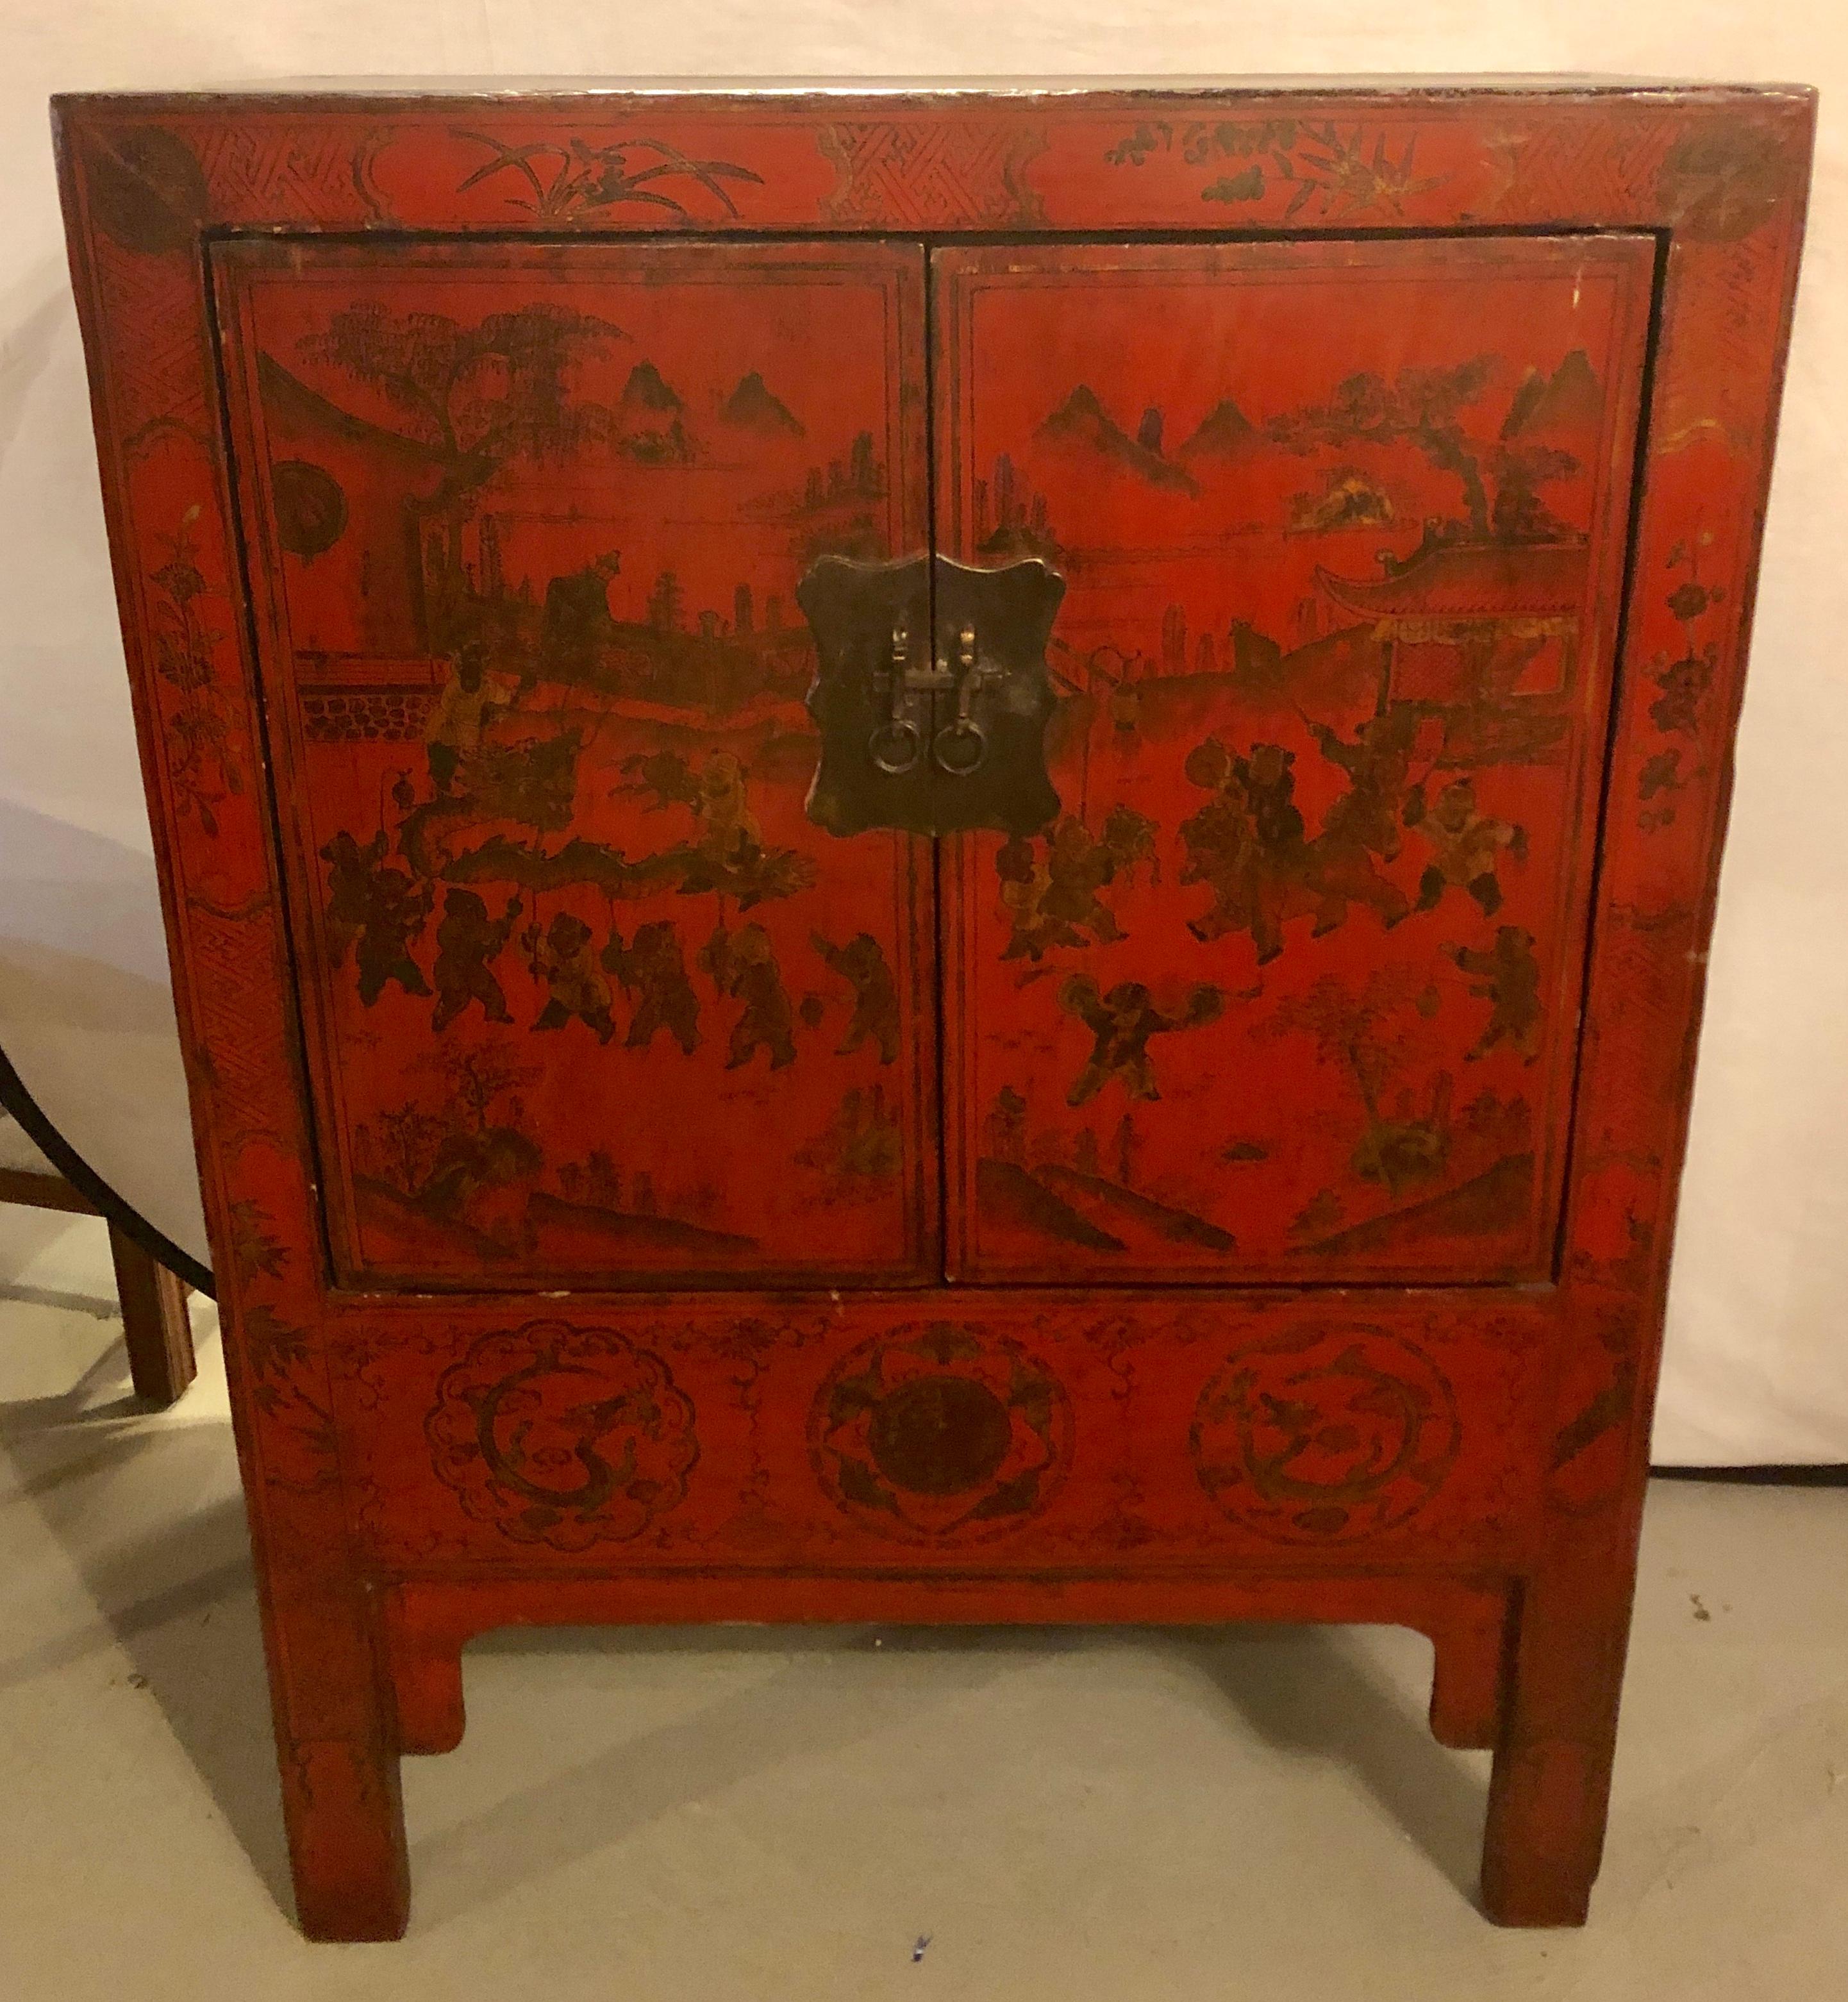 19th century Chinese export two-door commode or cabinet. A single drawer under a pair of doors leading to a large storage area. The exterior with finely painted figures and scenes.